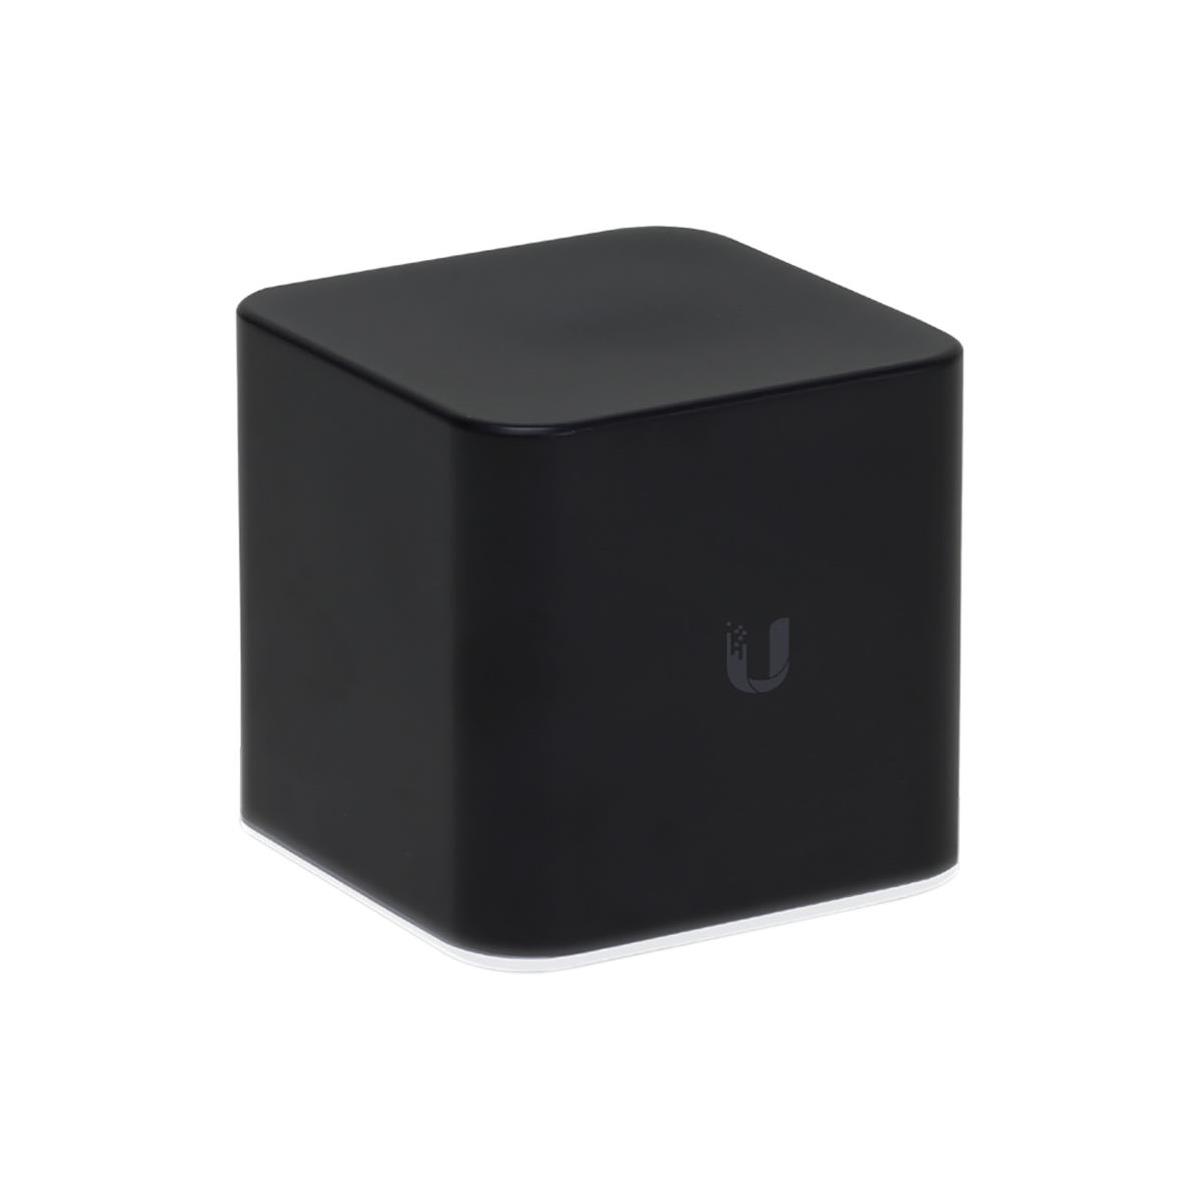 Image of Ubiquiti Networks airCube-ISP Home Wi-Fi Access Point